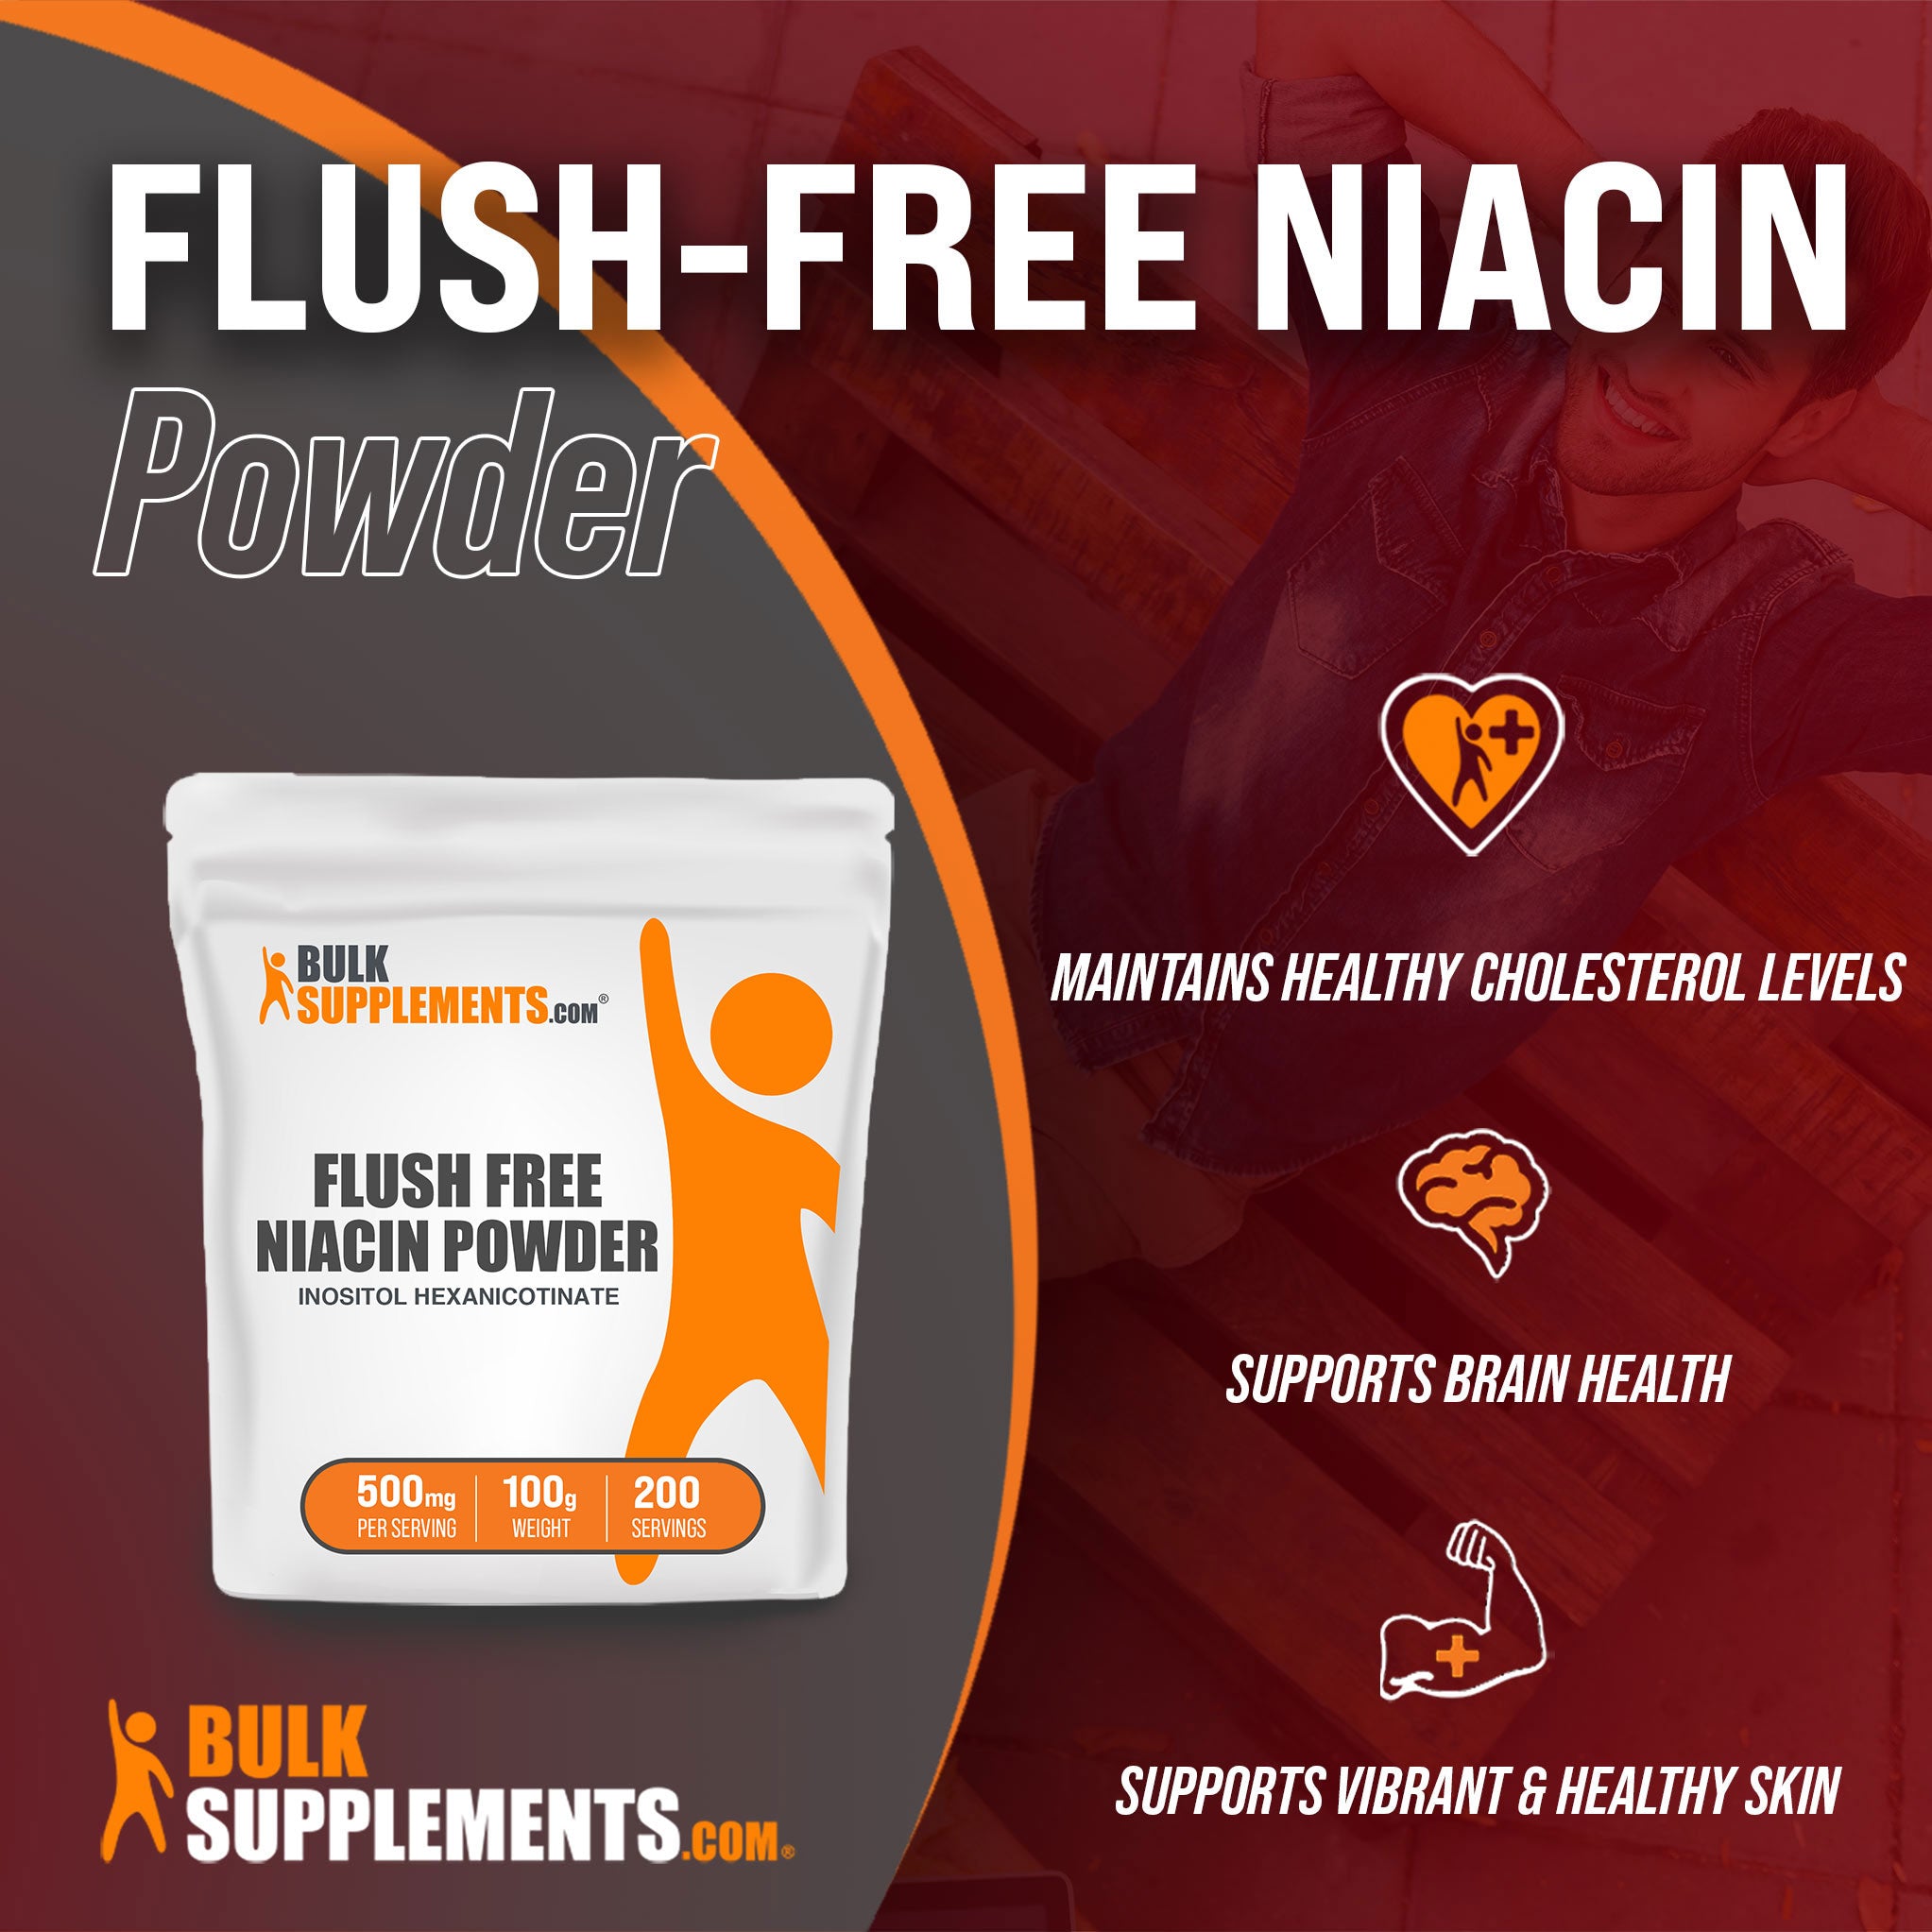 Benefits of Flush-Free Niacin; maintains healthy cholesterol levels, supports brain health, supports vibrant and healthy skin